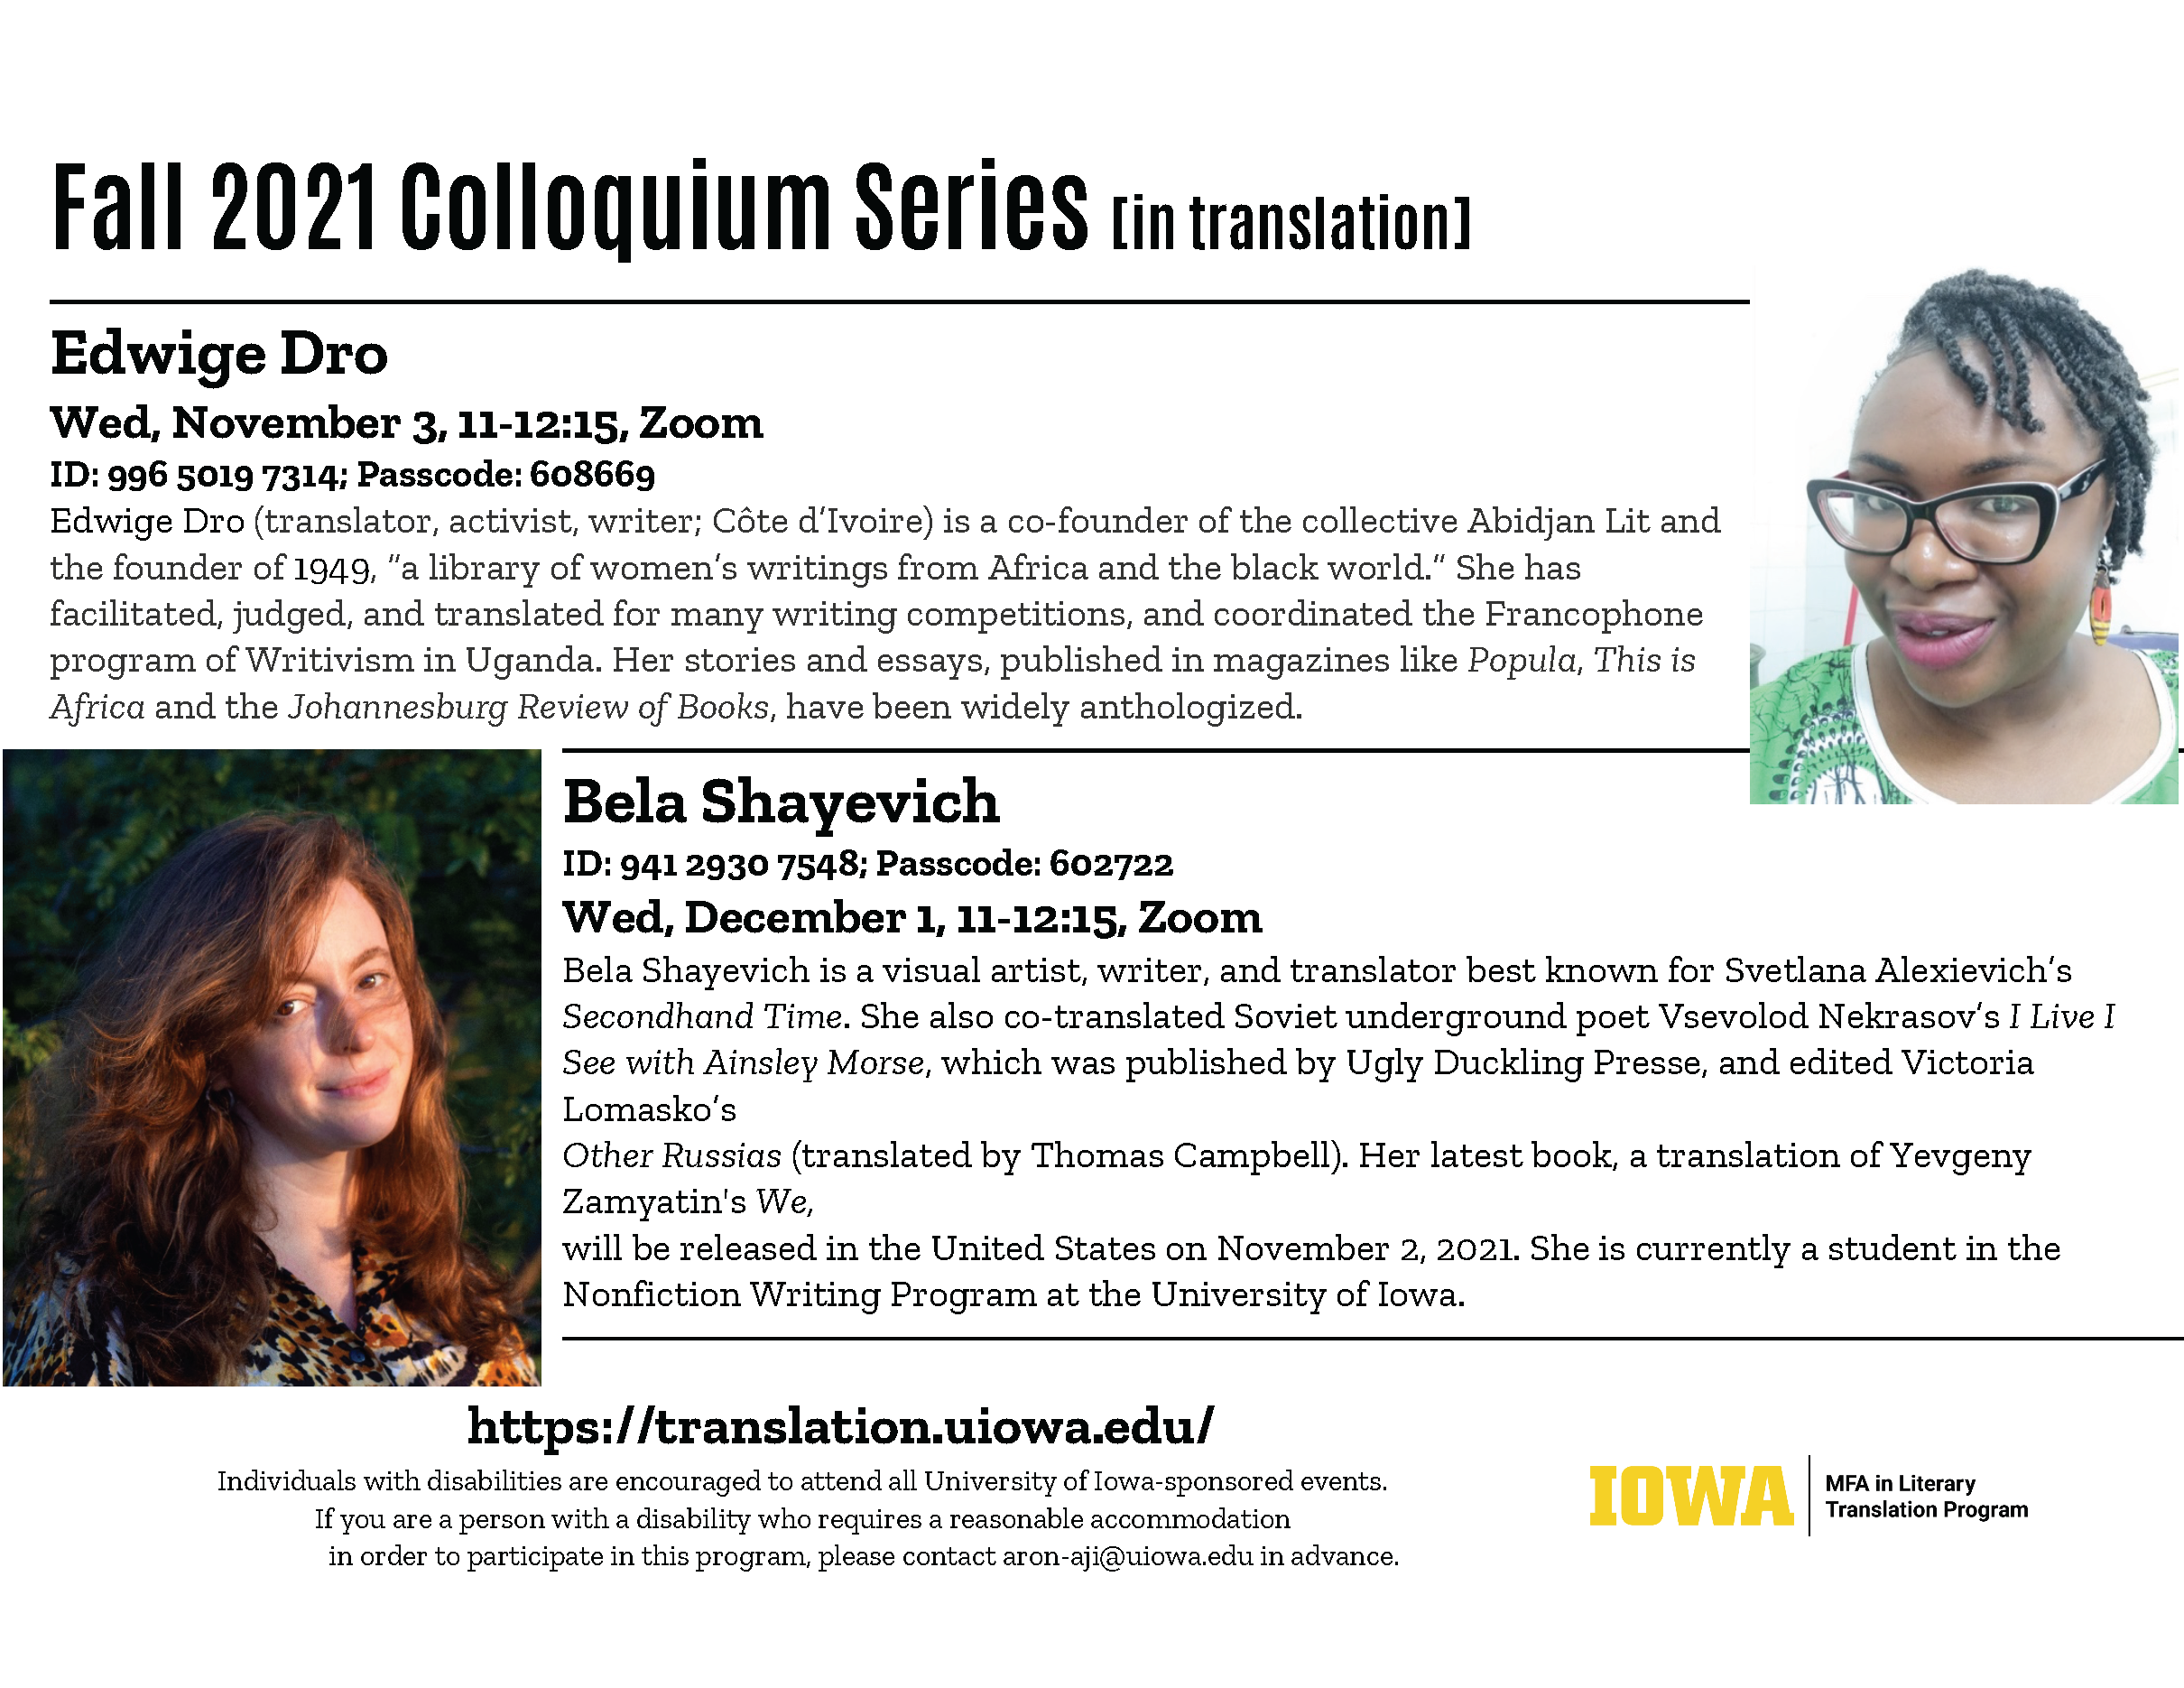 Fall 2021 Colloquium Series in translation. Edwige Dro Wed, November 3, 11-12:15, Zoom ID: 996 5019 7314; Passcode: 608669 Edwige Dro (translator, activist, writer; Côte d’Ivoire) is a co-founder of the collective Abidjan Lit and the founder of 1949, “a library of women’s writings from Africa and the black world.” She has facilitated, judged, and translated for many writing competitions, and coordinated the Francophone program of Writivism in Uganda. Her stories and essays, published in magazines like Popula, This is Africa and the Johannesburg Review of Books, have been widely anthologized. Bela Shayevich ID: 941 2930 7548; Passcode: 602722 Wed, December 1, 11-12:15, Zoom Bela Shayevich is a visual artist, writer, and translator best known for Svetlana Alexievich’s Secondhand Time. She also co-translated Soviet underground poet Vsevolod Nekrasov’s I Live I See with Ainsley Morse, which was published by Ugly Duckling Presse, and edited Victoria Lomasko’s Other Russias (translated by Thomas Campbell). Her latest book, a translation of Yevgeny Zamyatin's We, will be released in the United States on November 2, 2021. She is currently a student in the Nonfiction Writing Program at the University of Iowa.  https://translation.uiowa.edu/ Individuals with disabilities are encouraged to attend all University of Iowa-sponsored events. If you are a person with a disability who requires a reasonable accommodation in order to participate in this program, please contact aron-aji@uiowa.edu in advance.